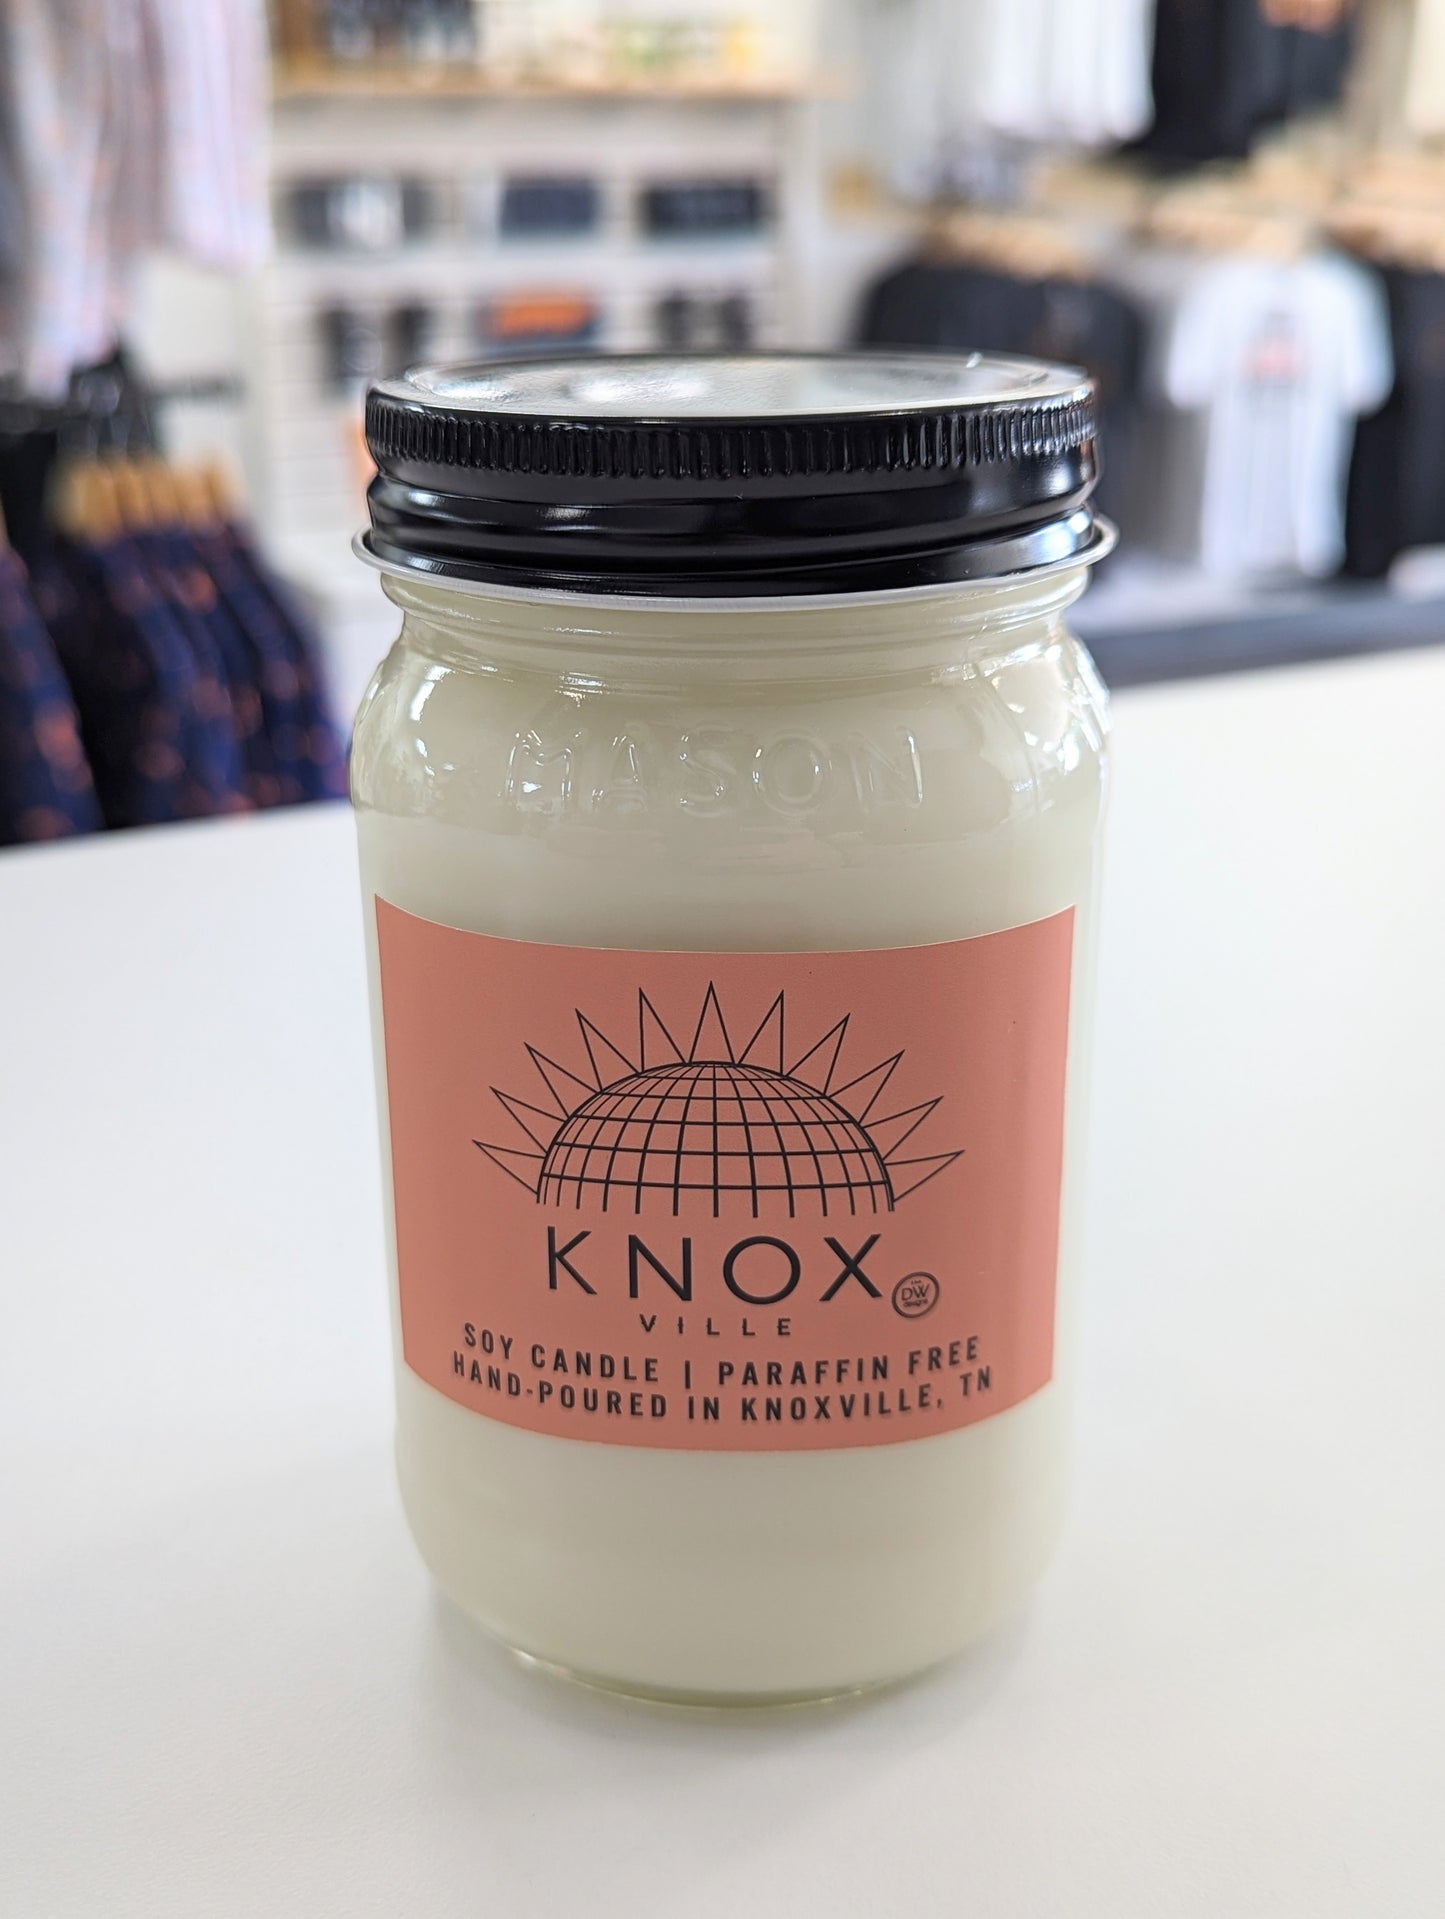 The Knoxville Sunset Candle